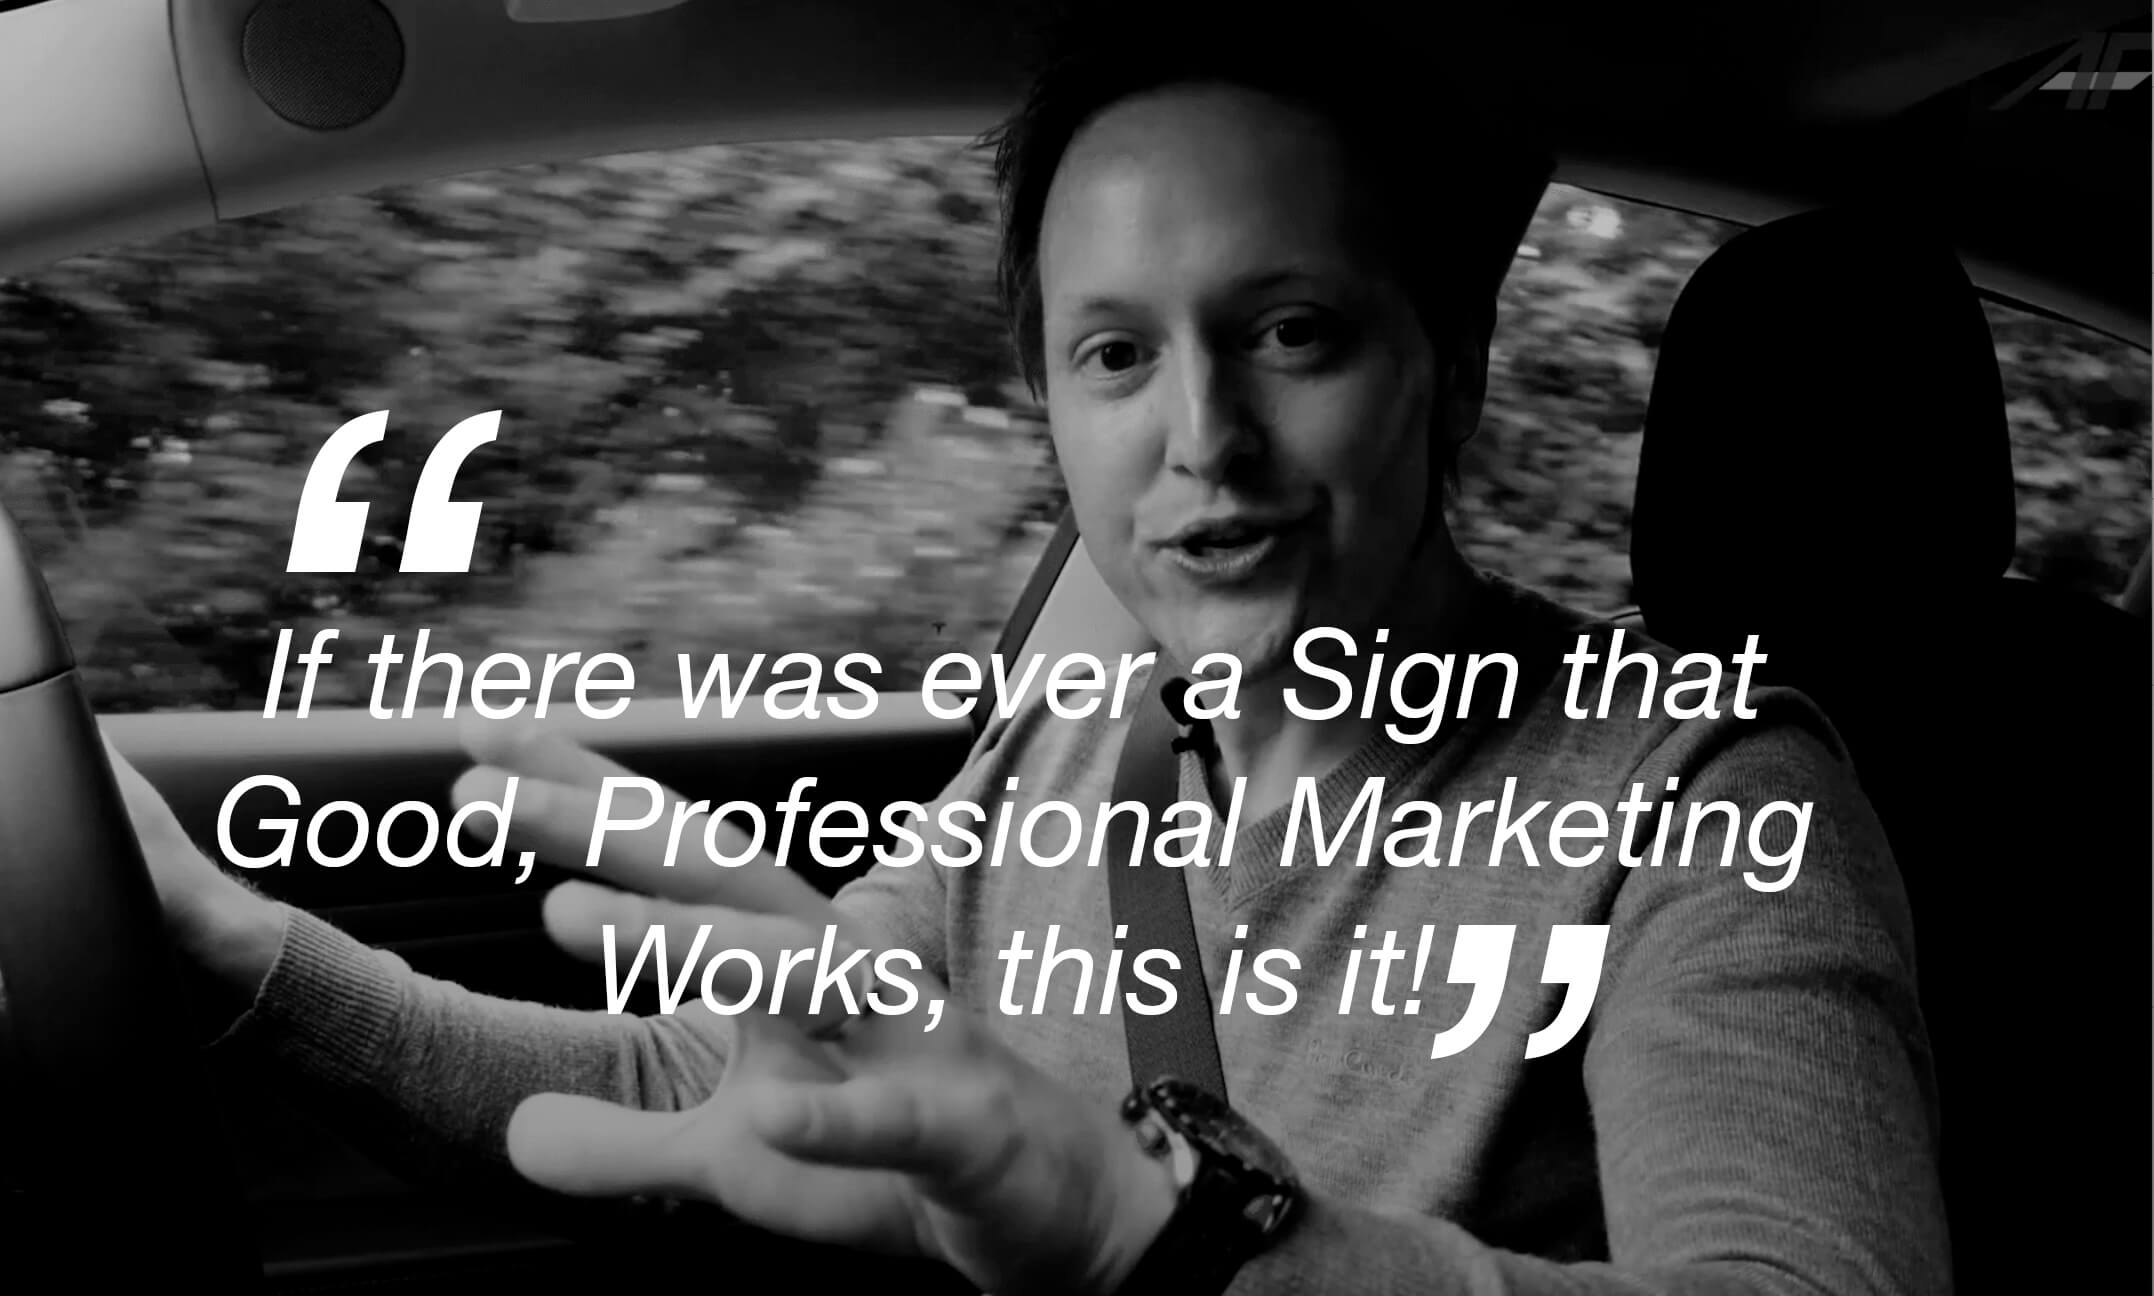 testimonial quote from happy automotive client